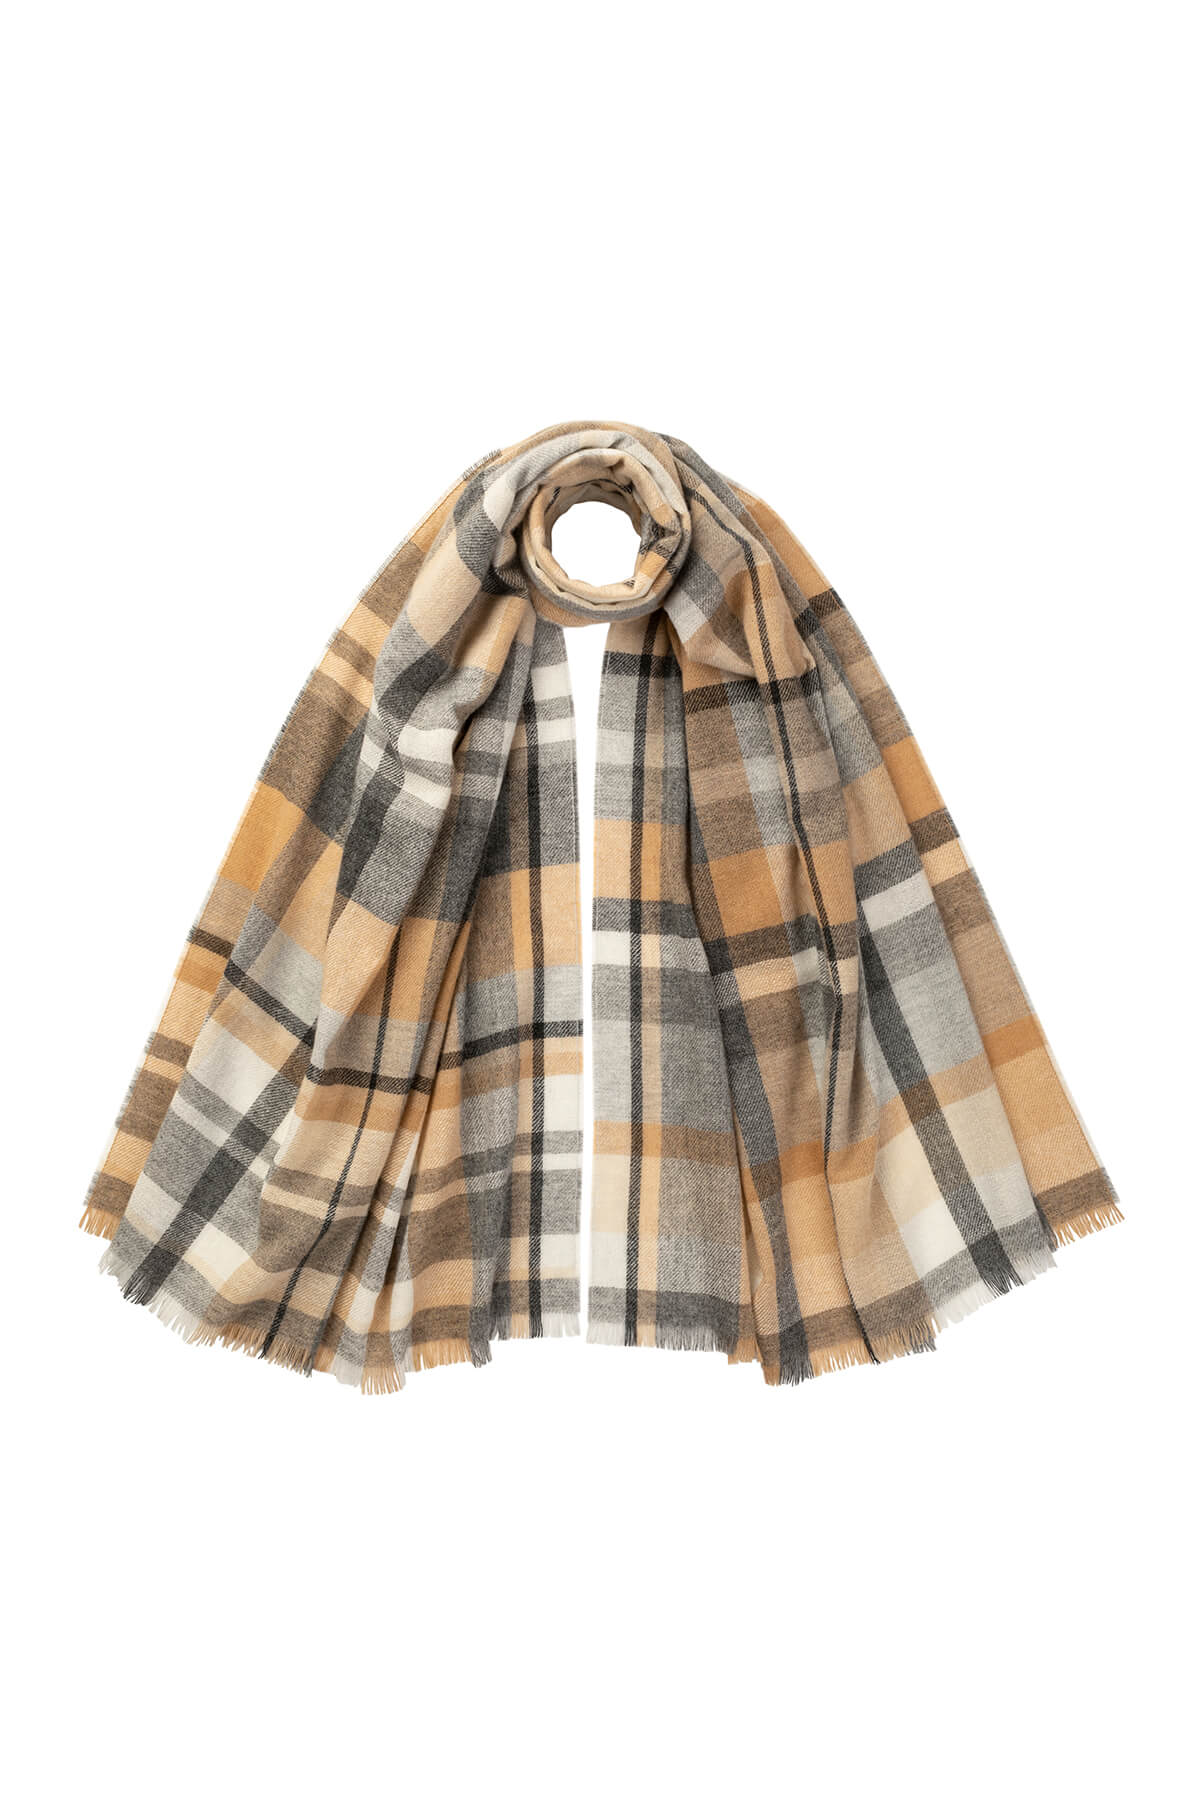 Johnstons of Elgin Madras Check Lightweight Cashmere Stole in Camel on a white background WA001174RU7328ONE